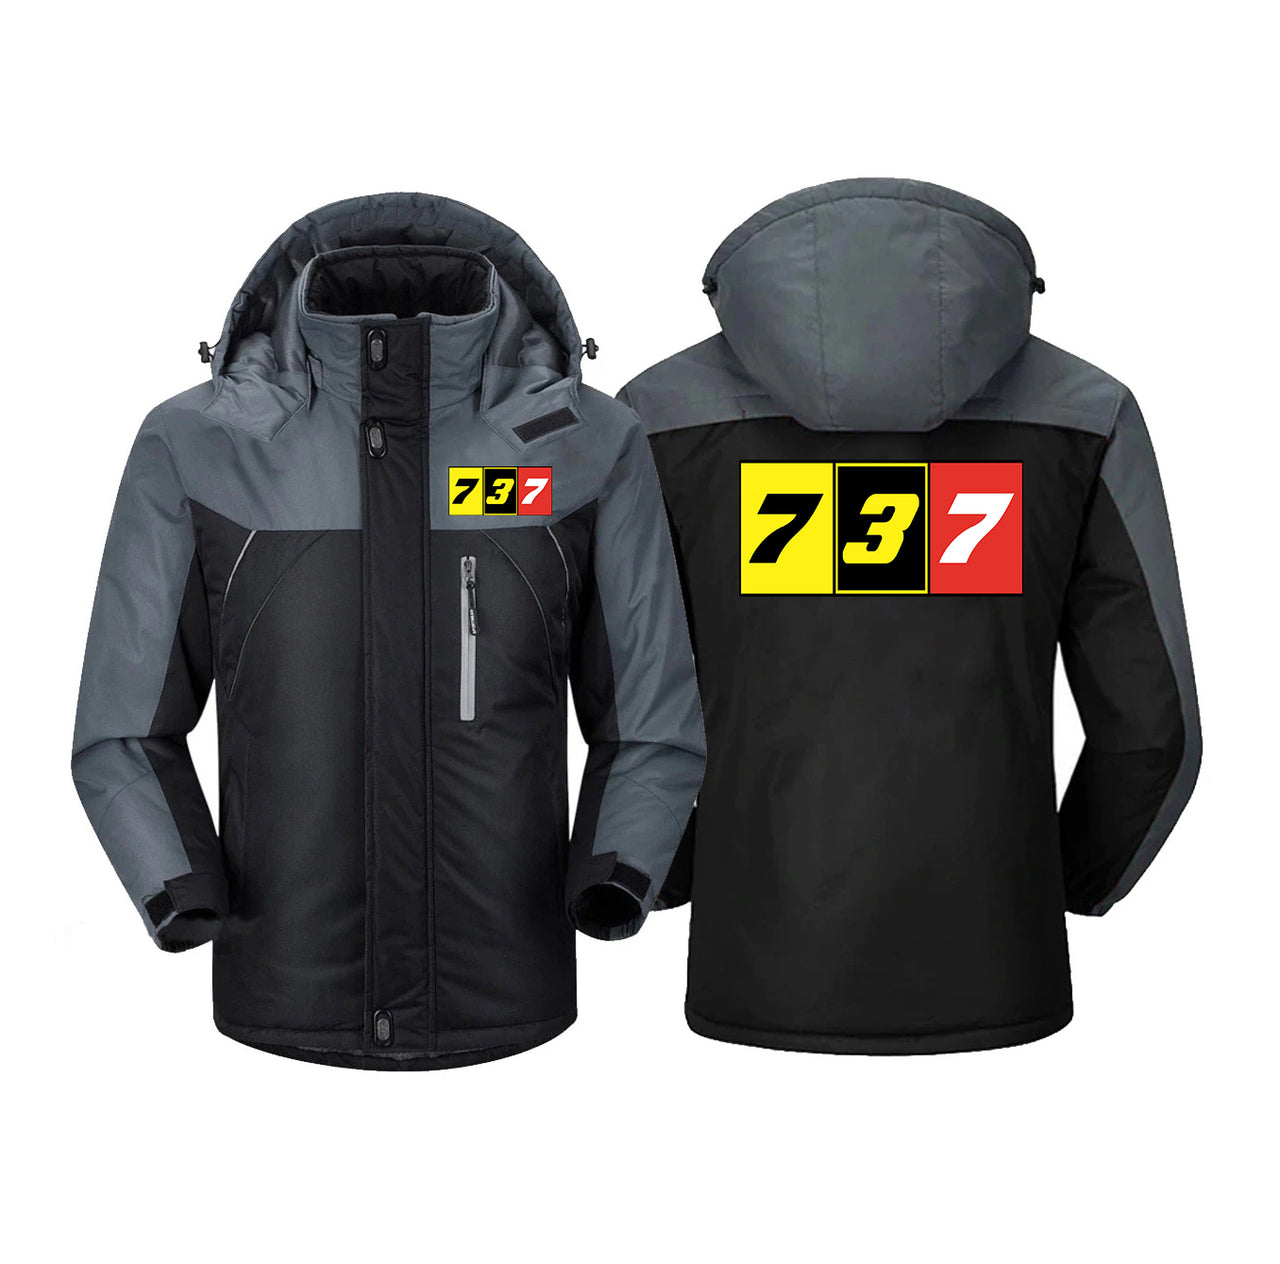 Flat Colourful 737 Designed Thick Winter Jackets